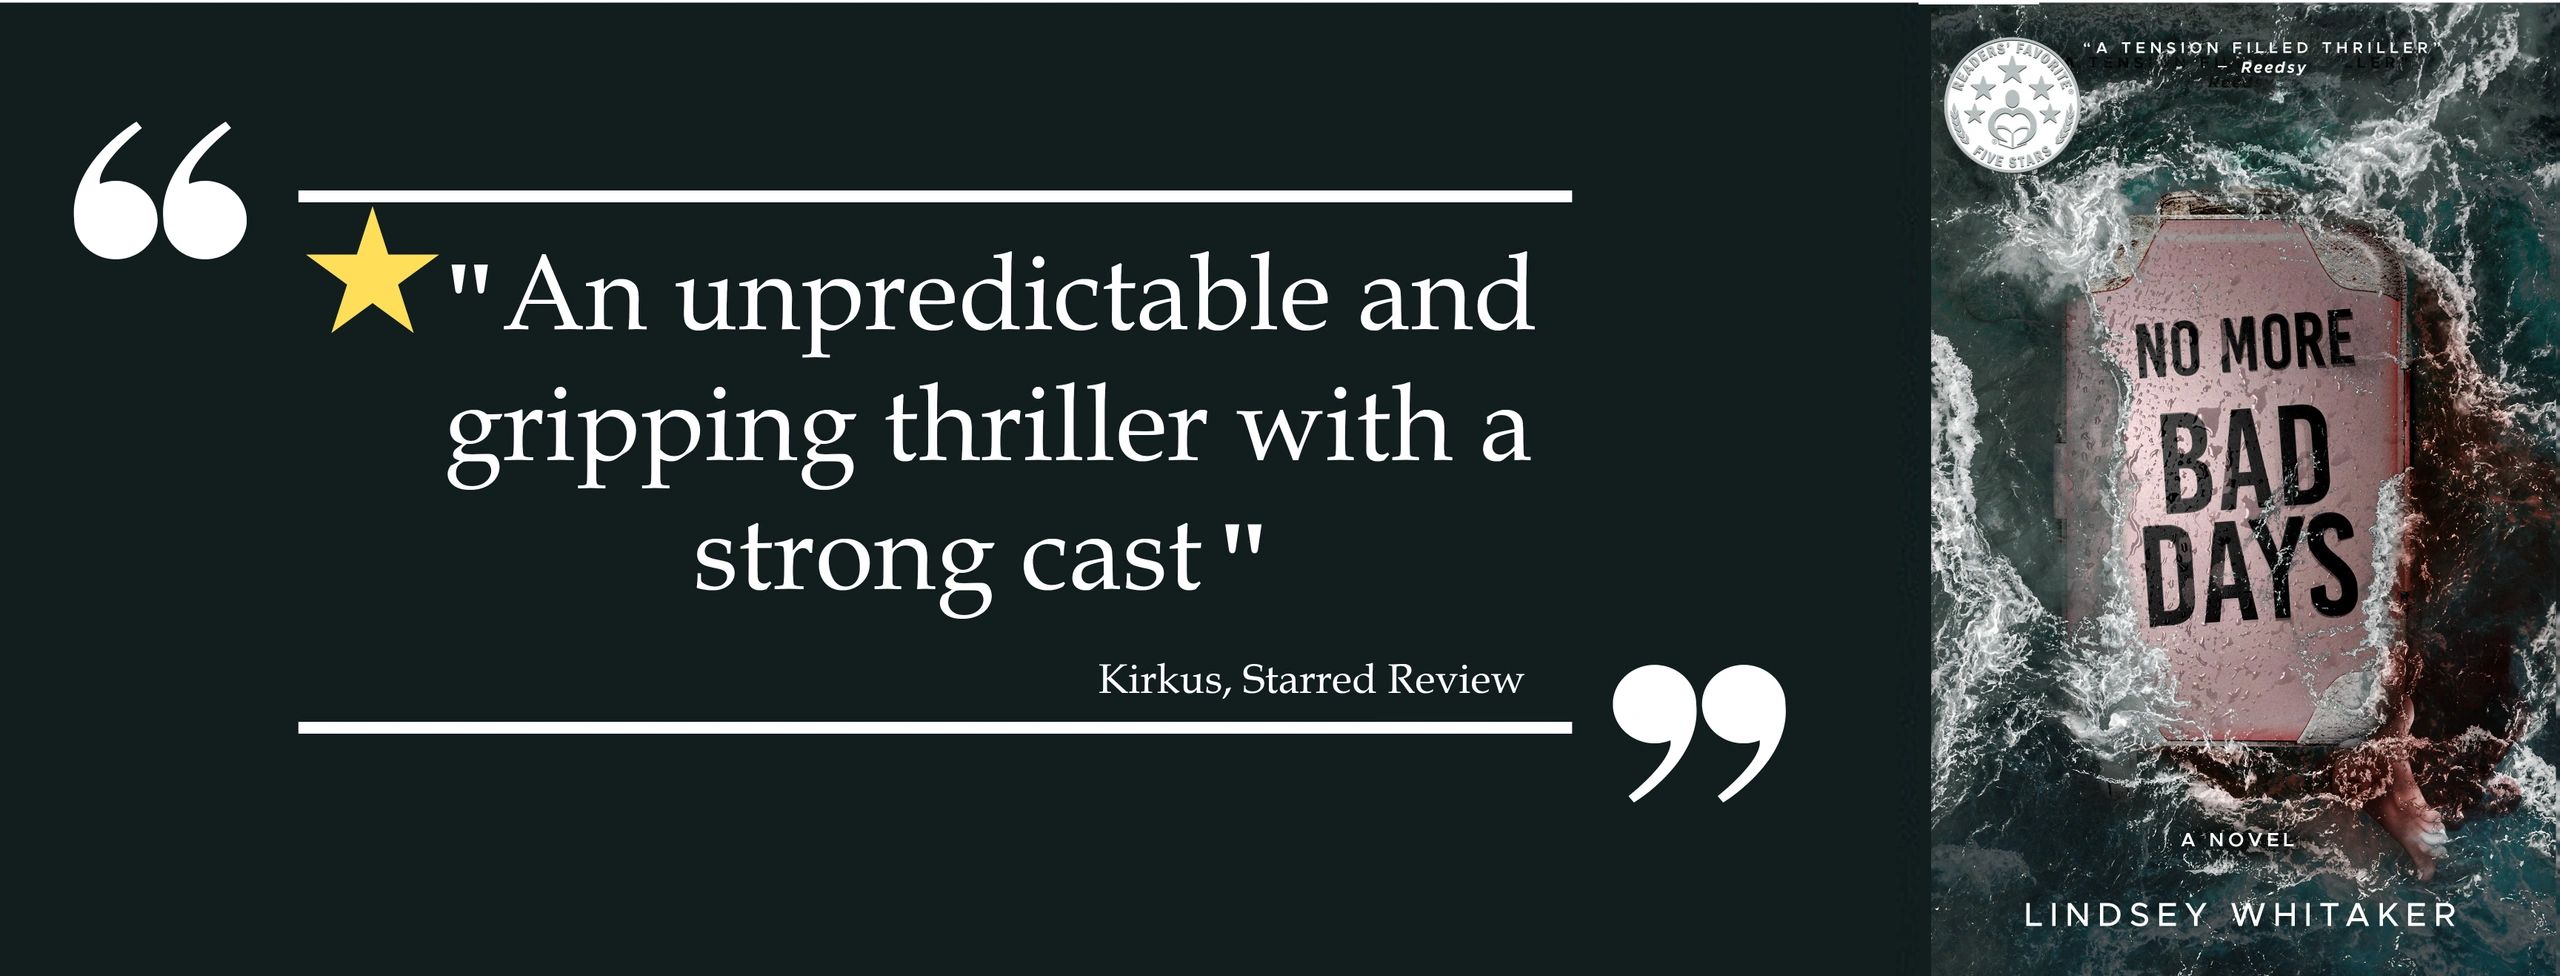 No More Bad Days An unpredictable and gripping thriller with a strong cast. Kirkus Star